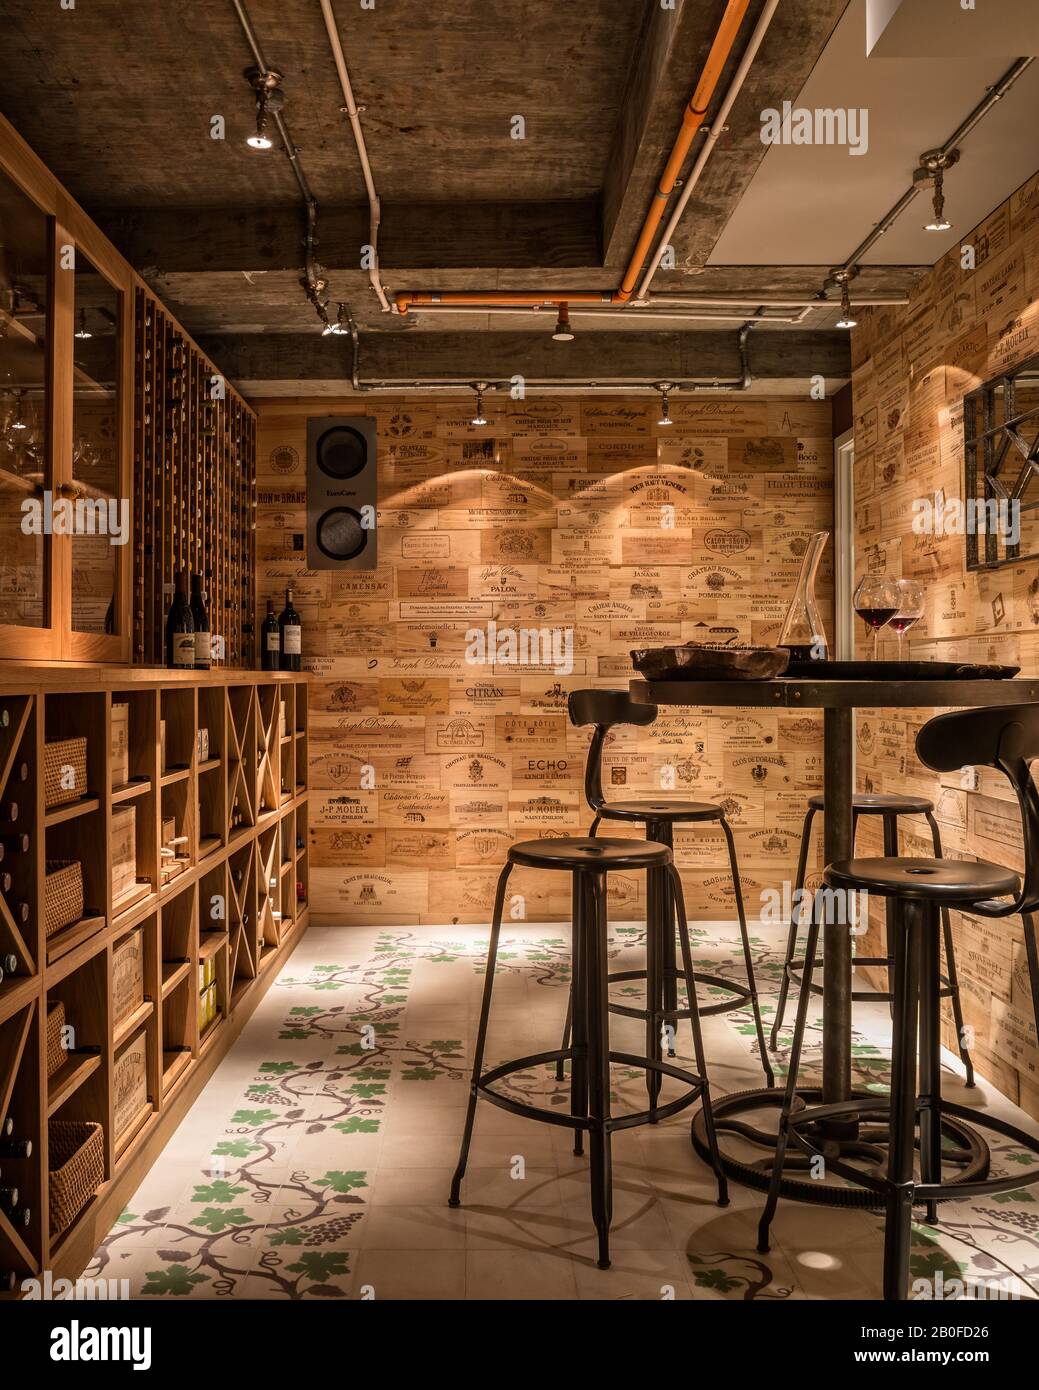 Wall cladding in wine cellar made from old wine boxes and grapevine floor tiles from Emery & Cie Stock Photo